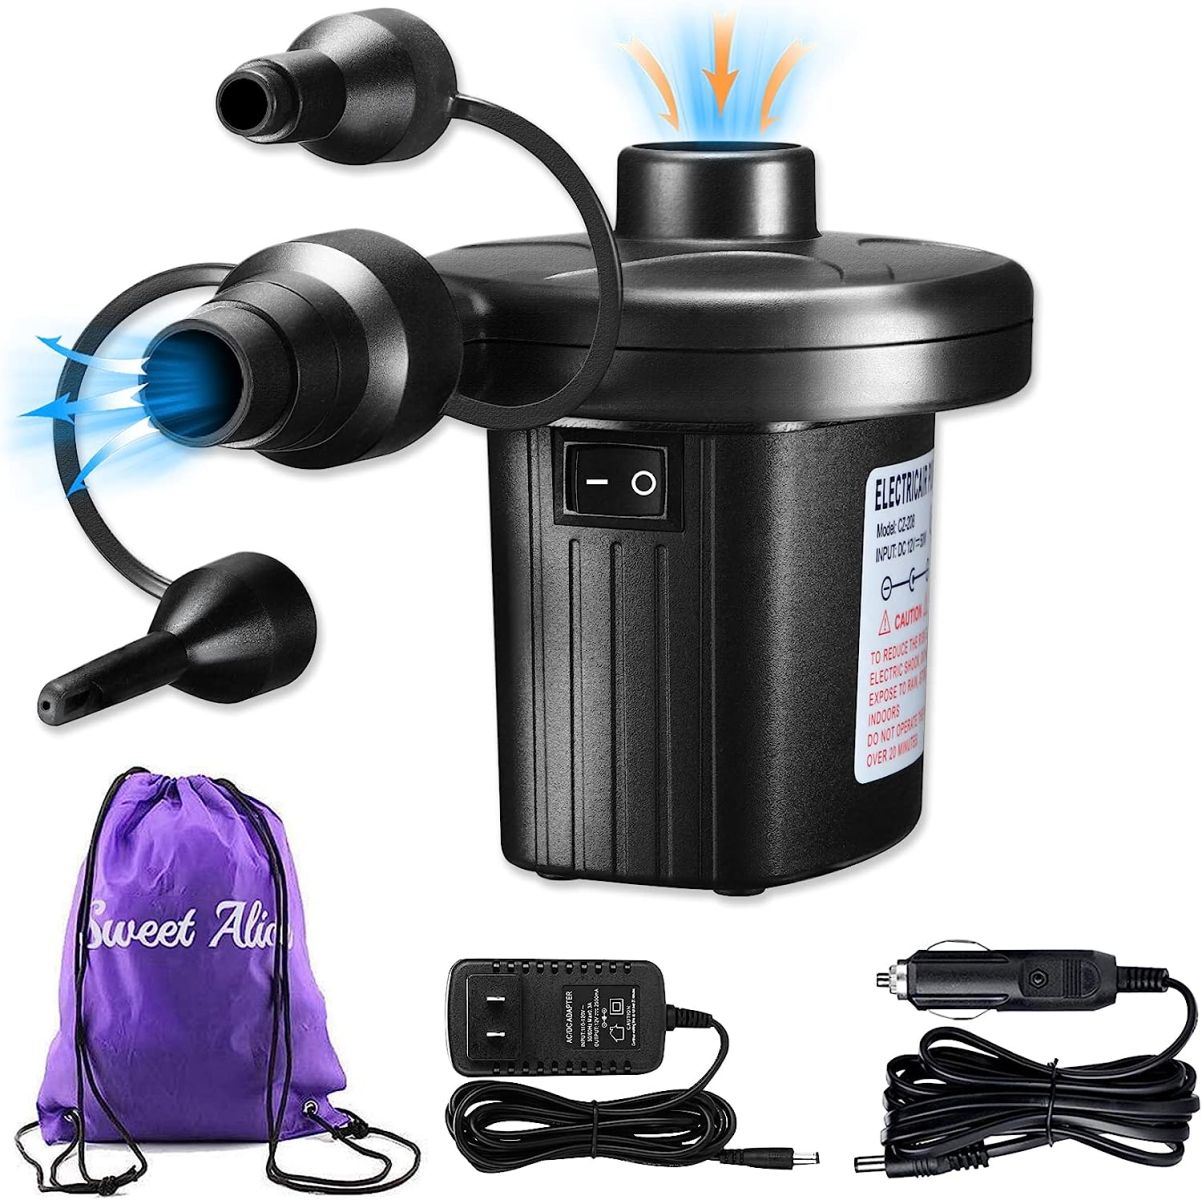 Electric Air Pump, 110V AC/12V DC Portable Air Mattress Pump Two-Way Universal Inflator Electric Pump for Inflatables Pool, Airbeds, etc with 3 Nozzles and 1 Storage Bag